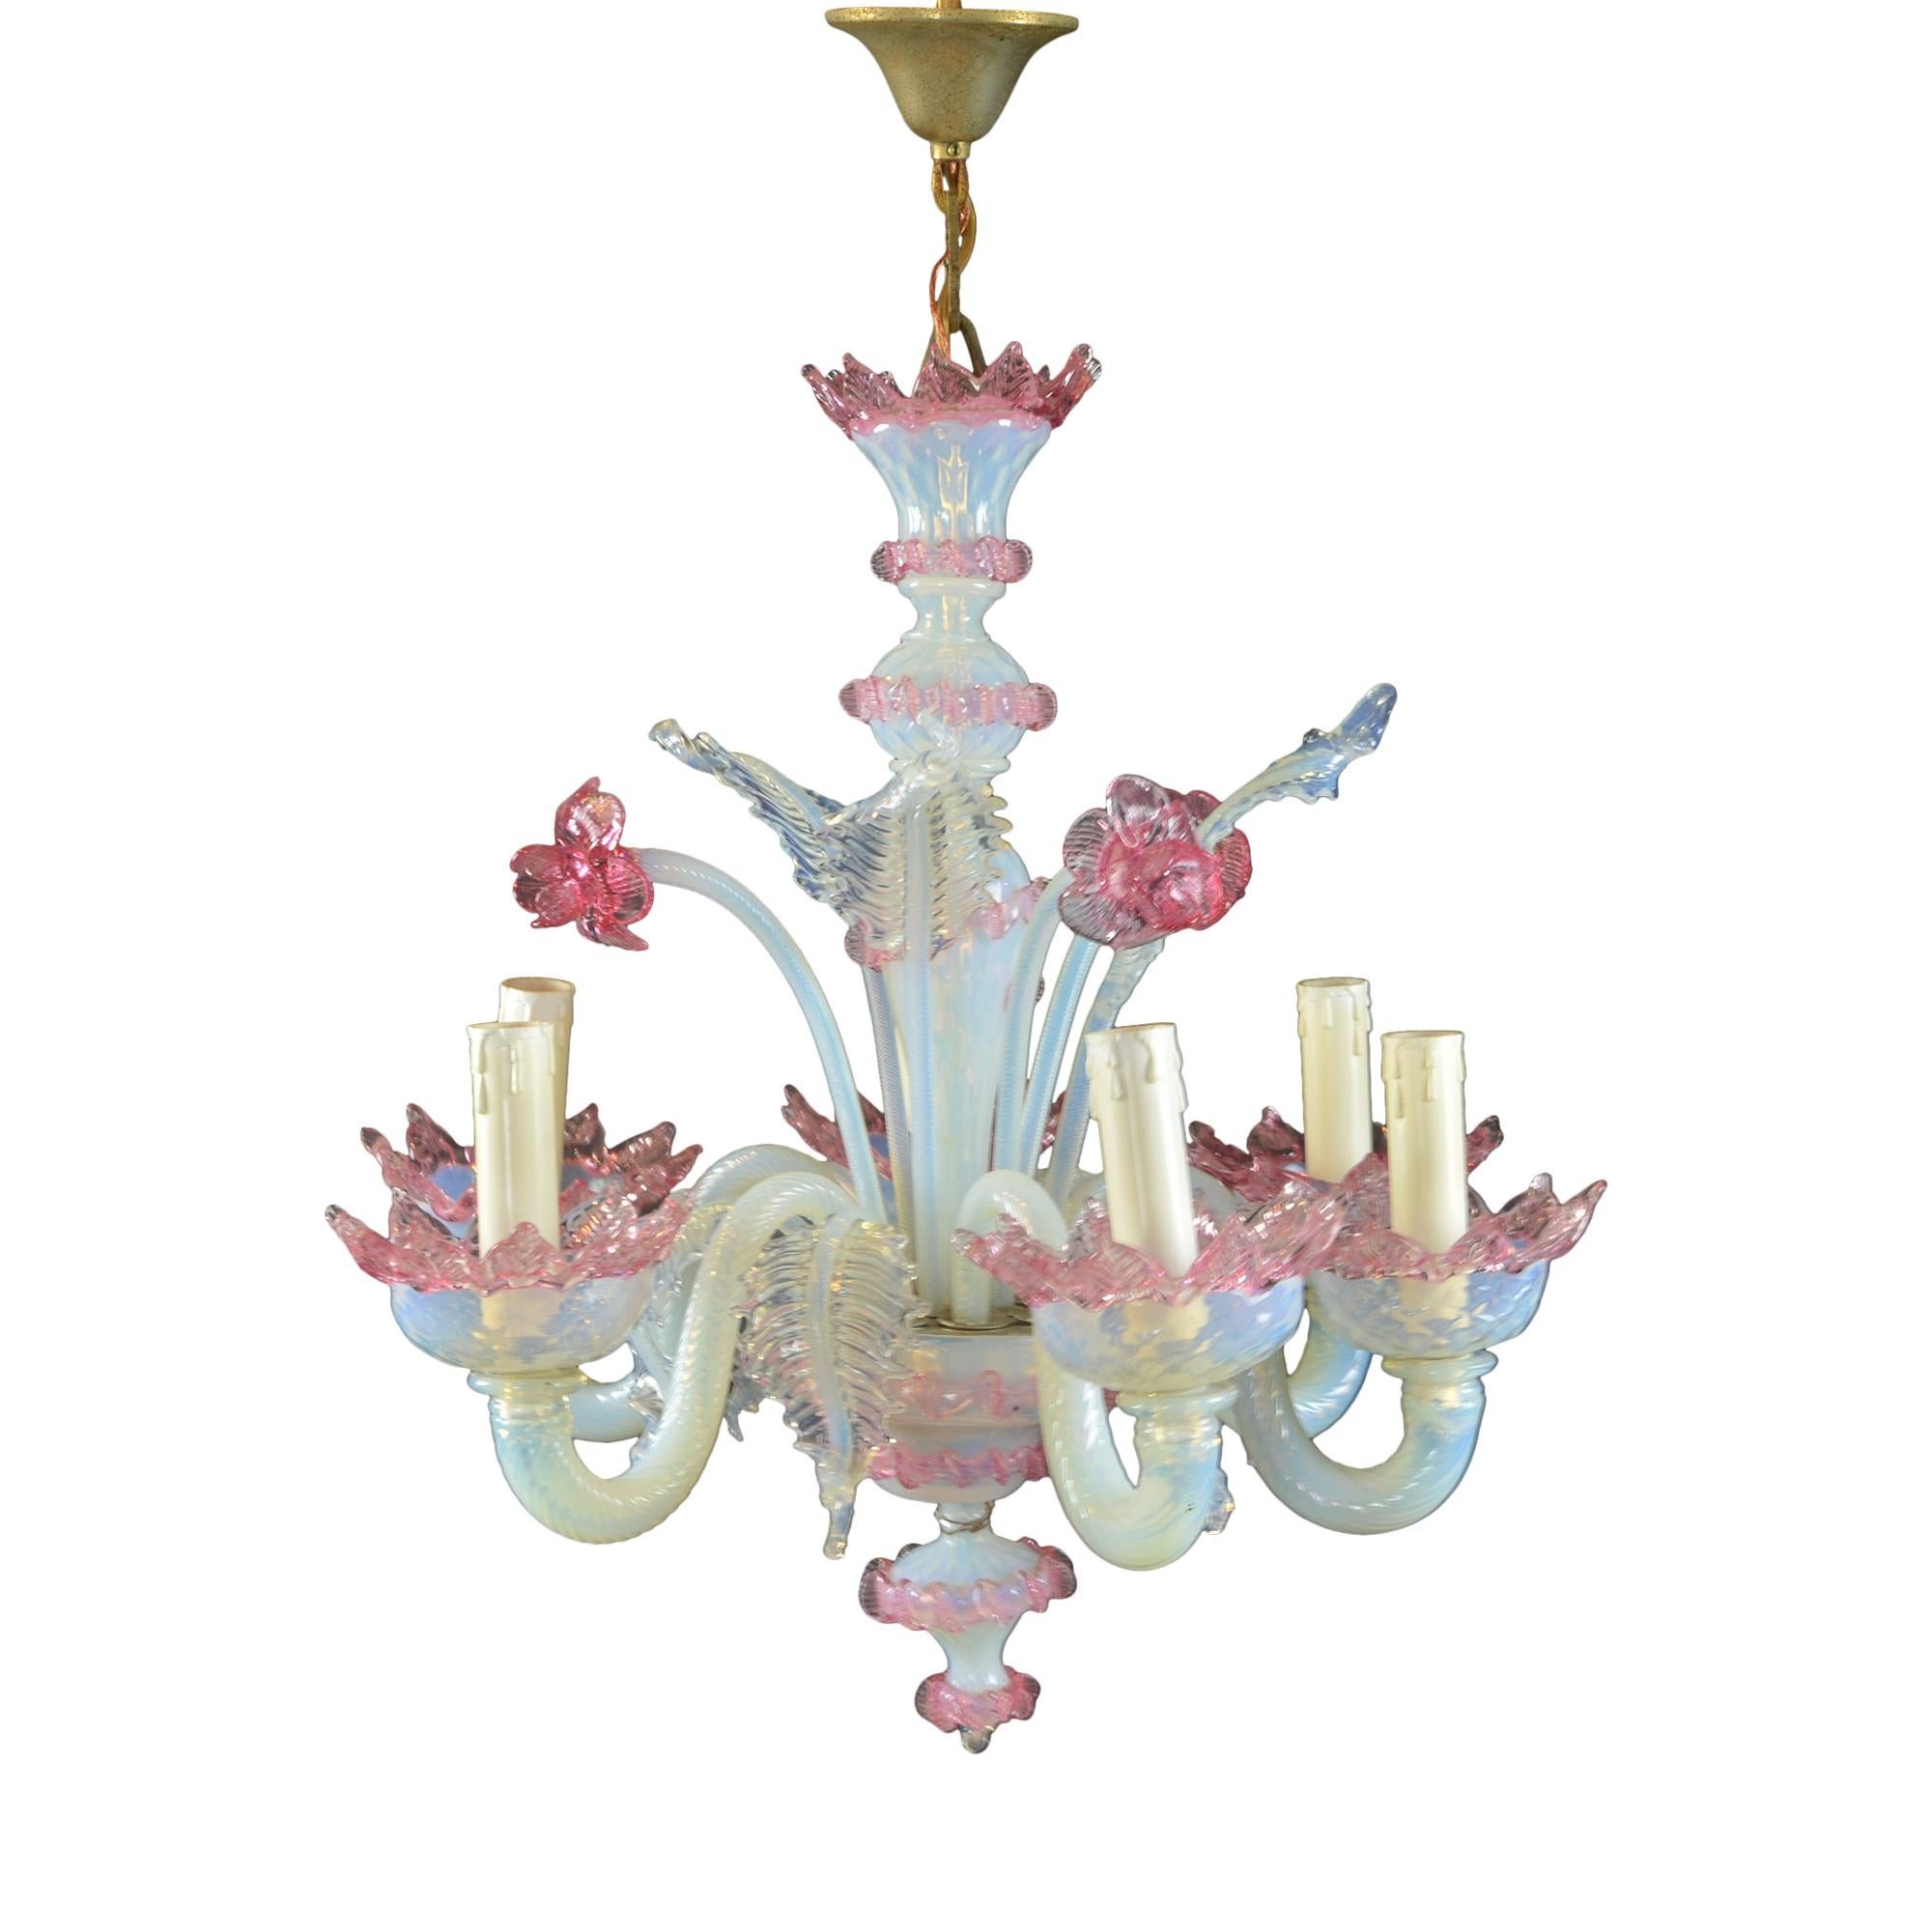 Antique Venetian Six-Light Opalescent Frond and Daffodil Chandelier